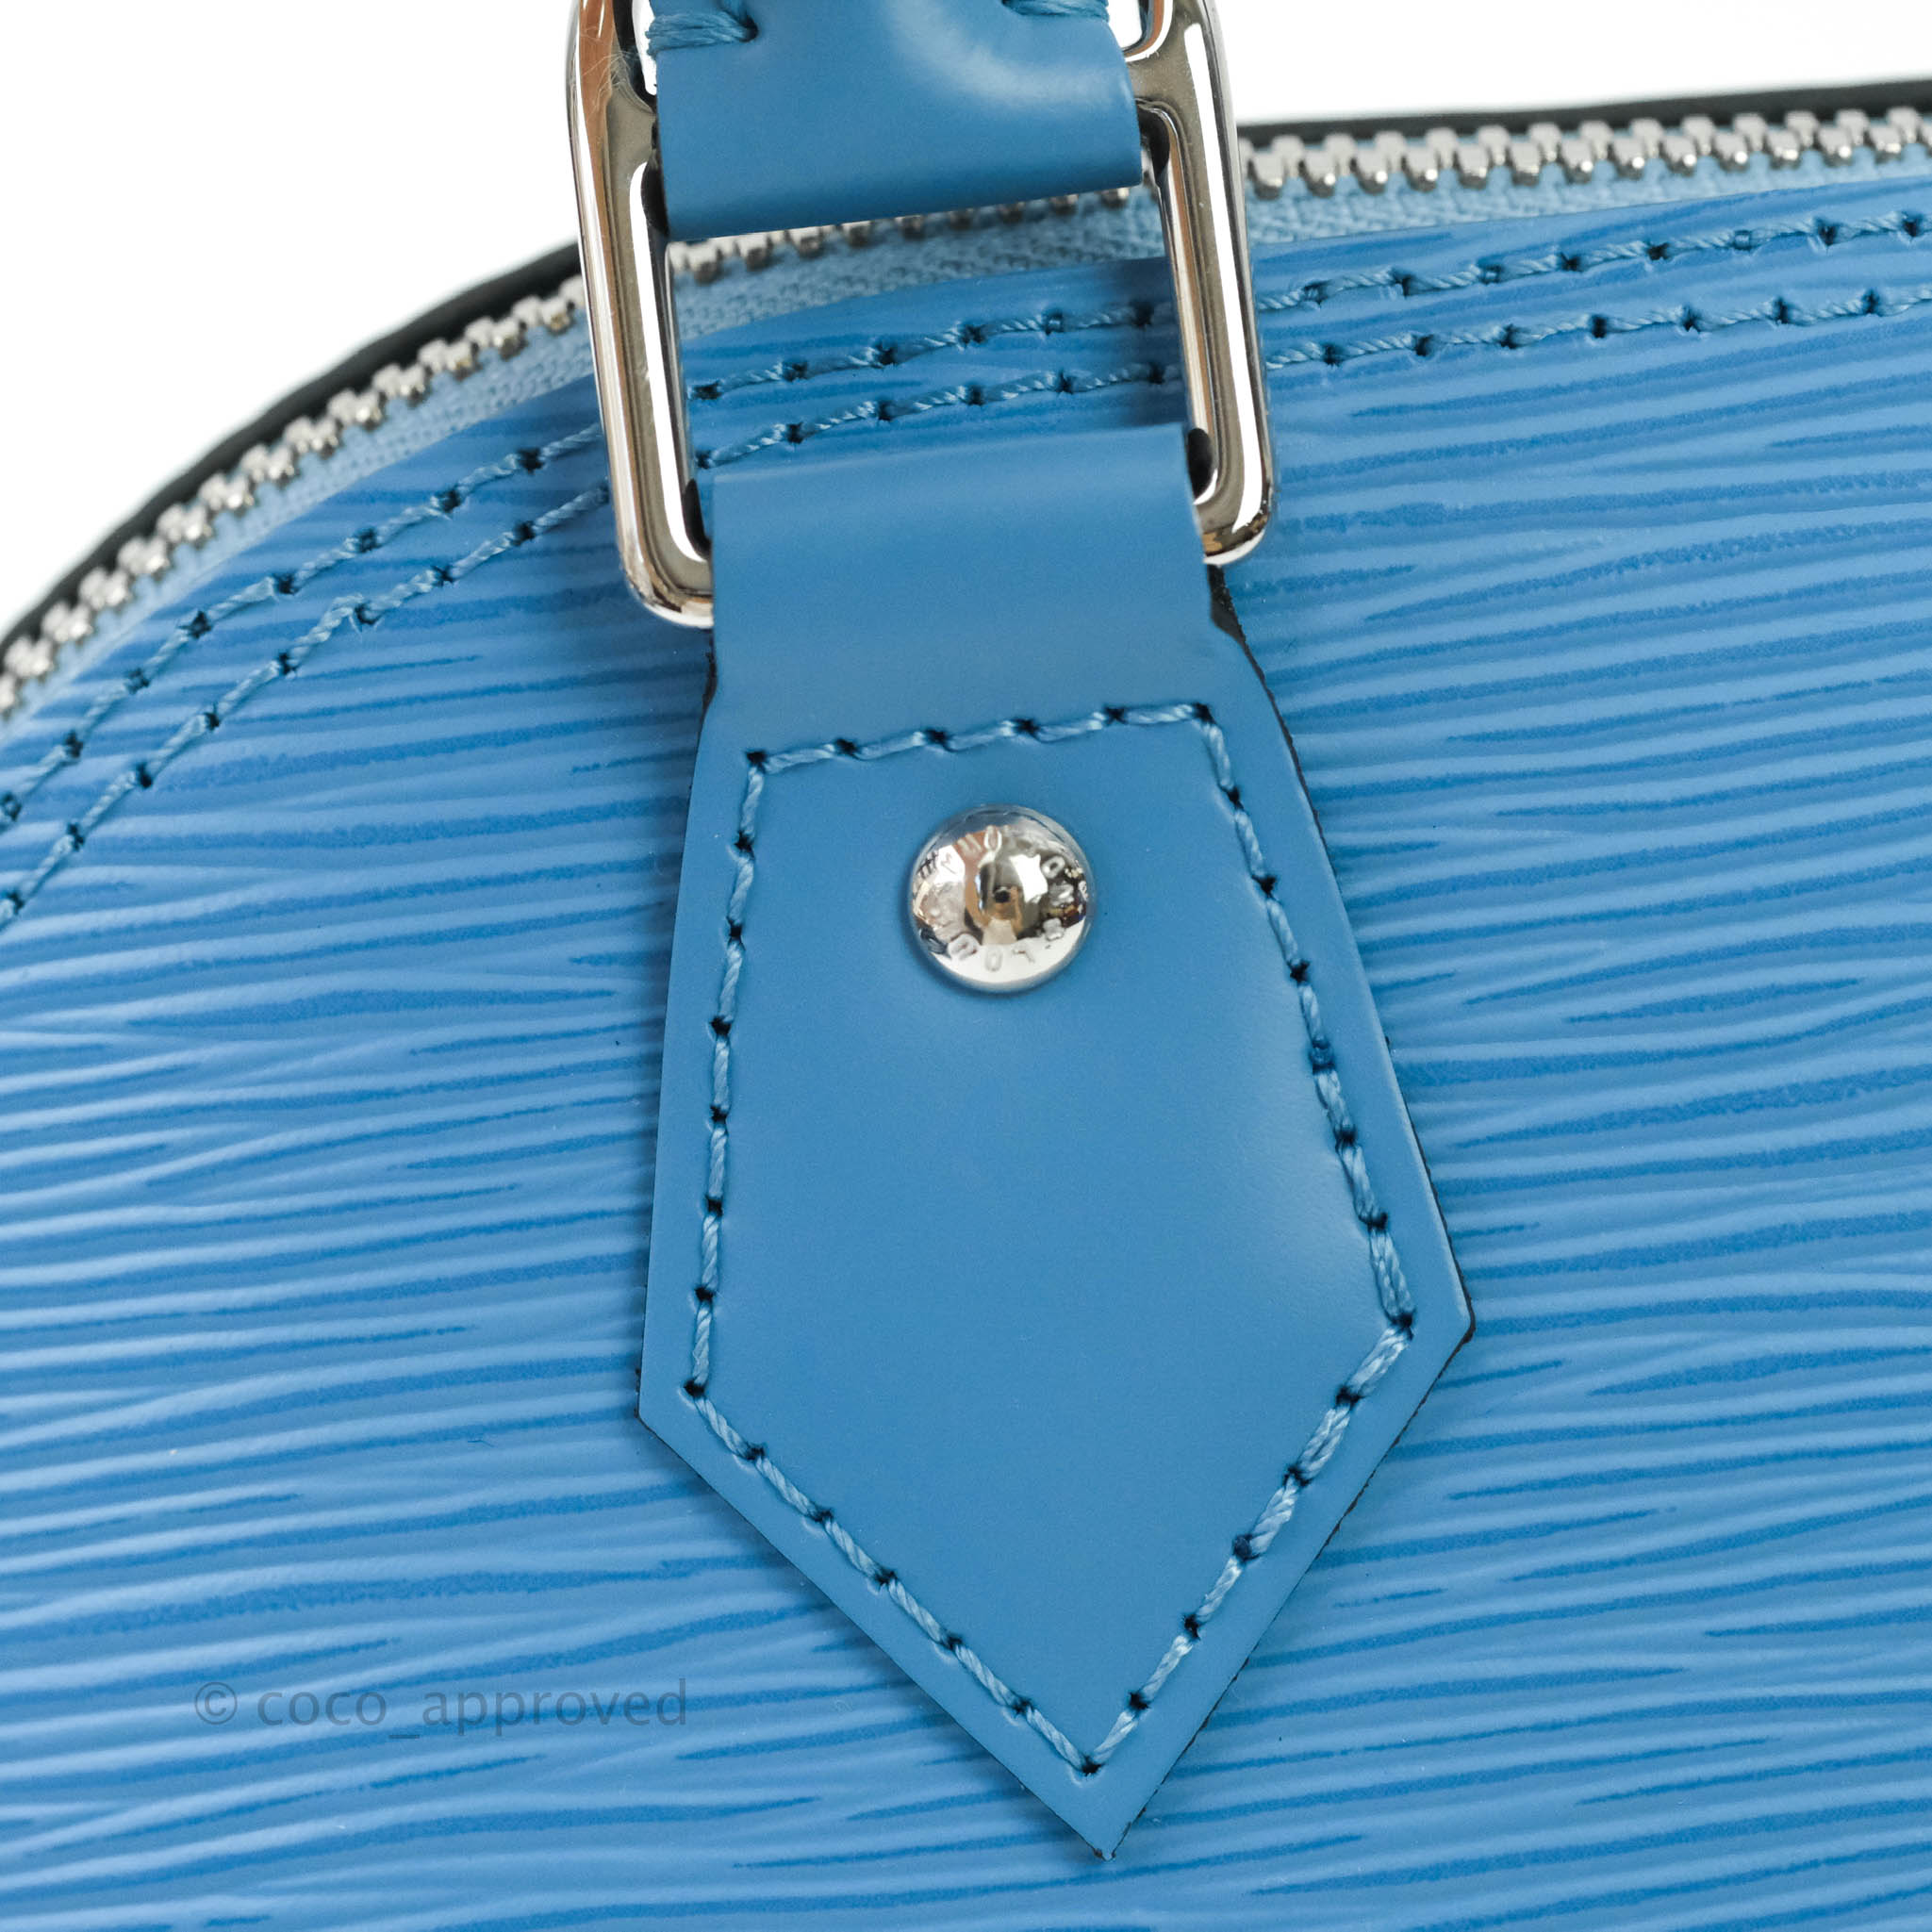 Louis Vuitton: The Alma BB Is Now Updated With A Fun Jacquard Strap -  BAGAHOLICBOY